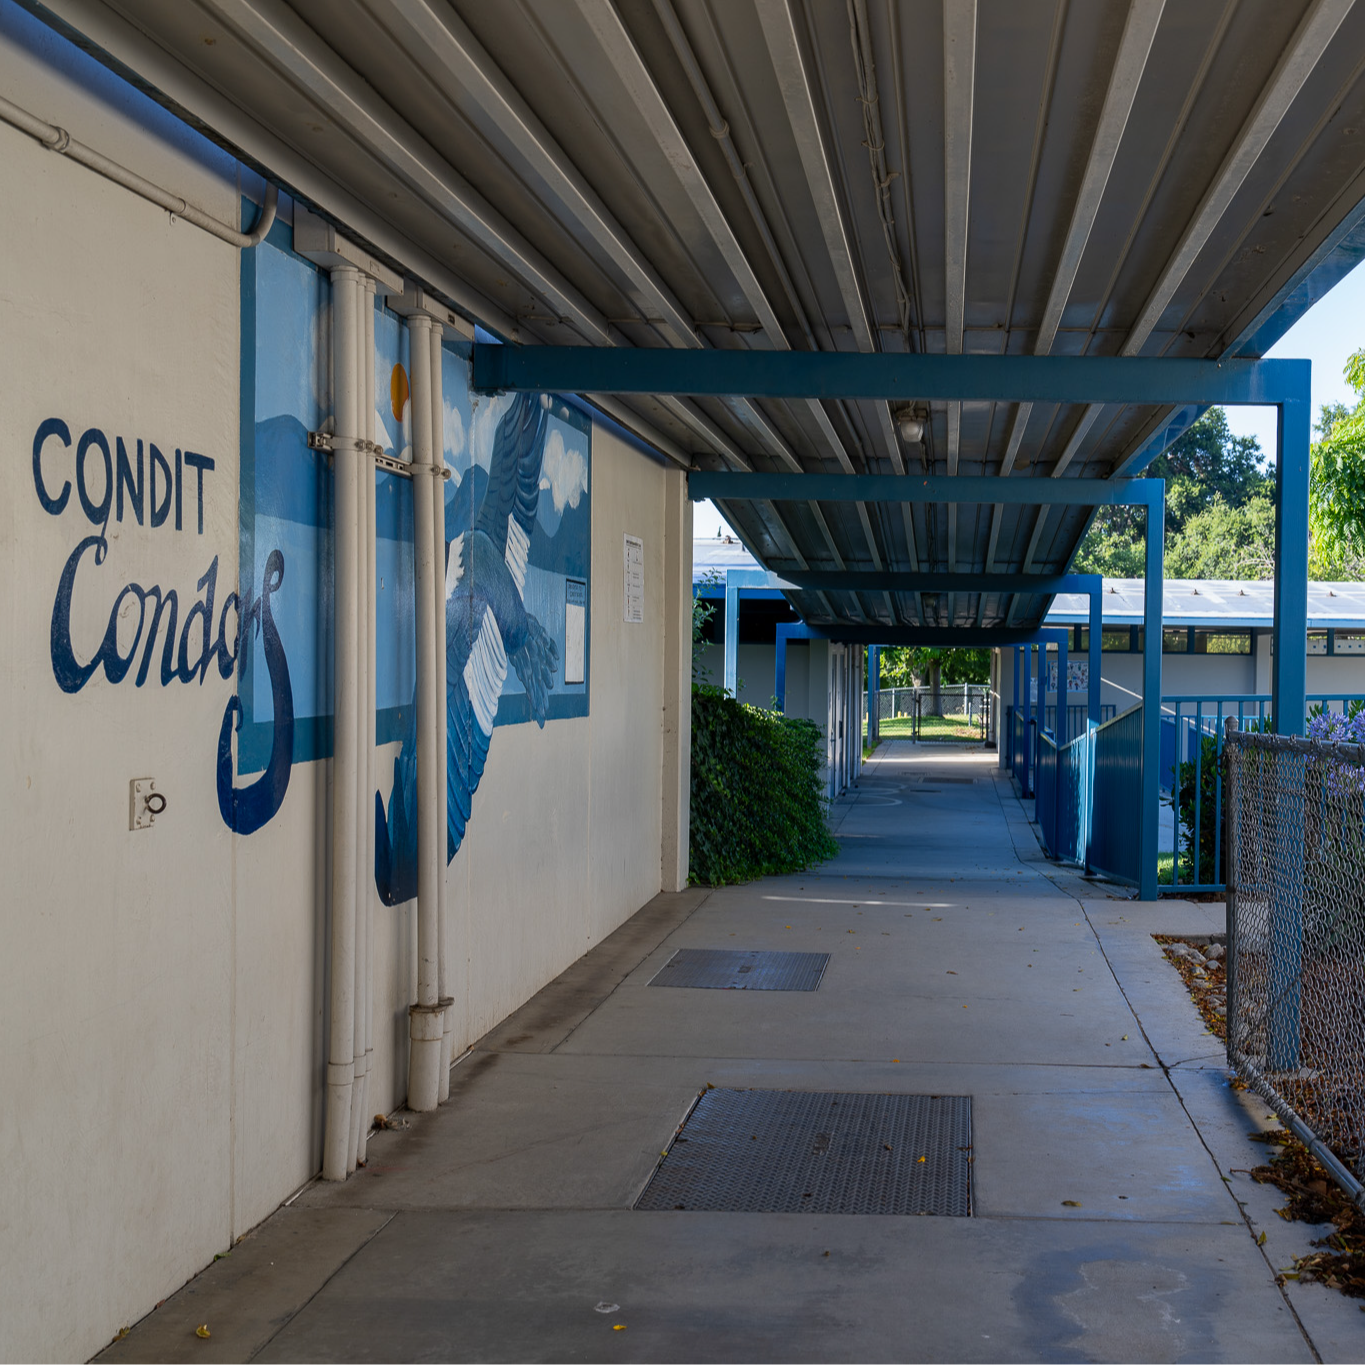 The front hallway at Condit Elementary School